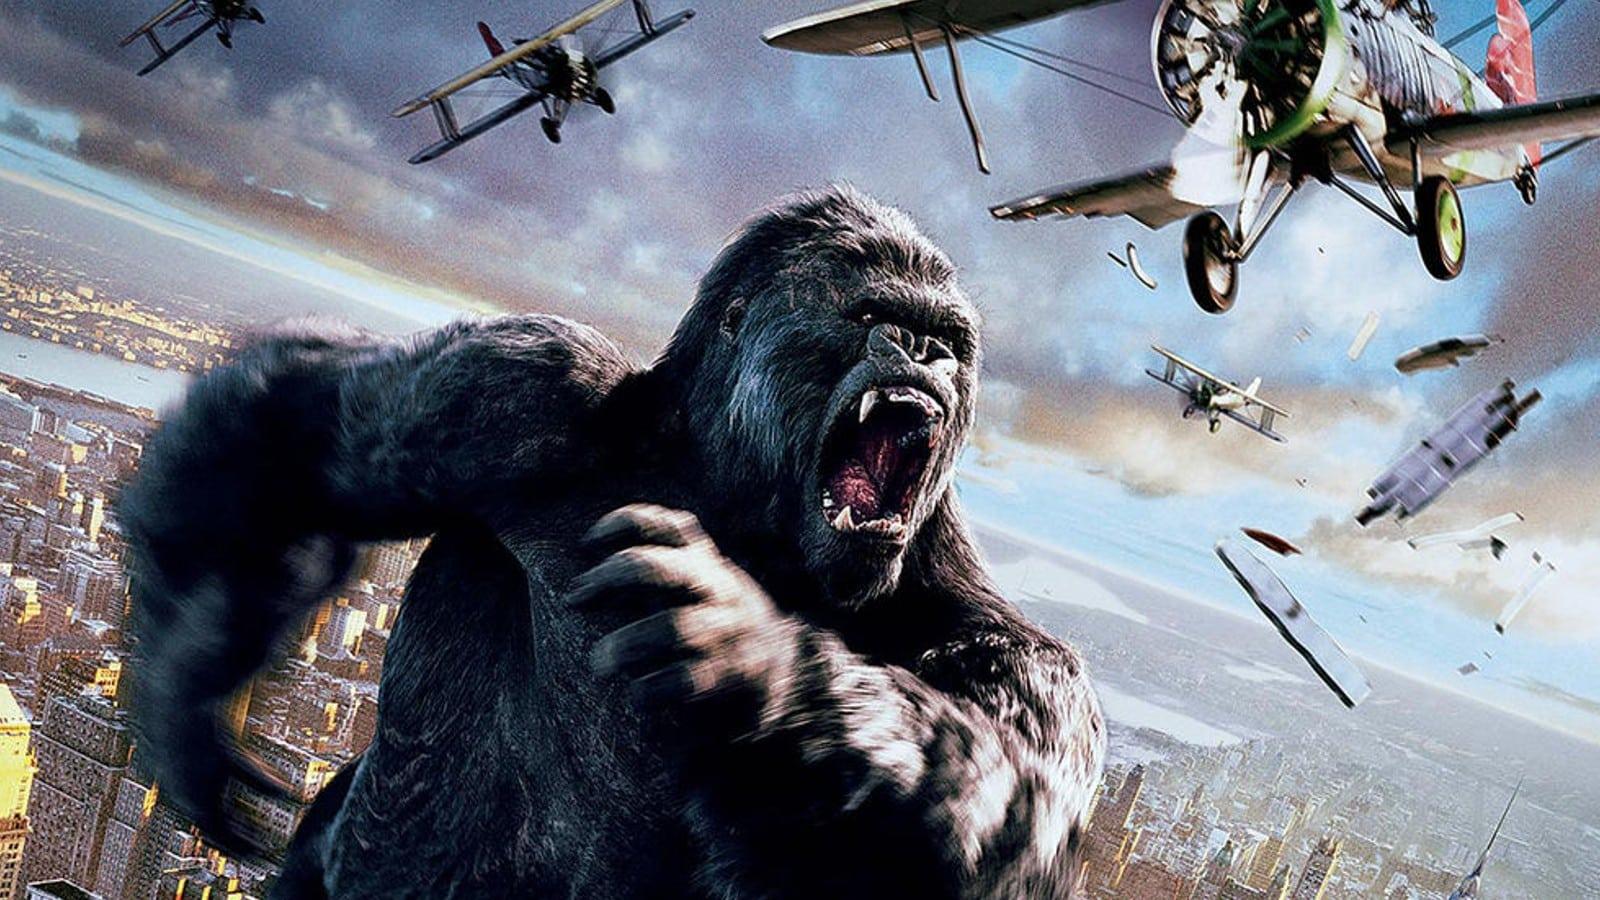 The poster for 2005's King Kong